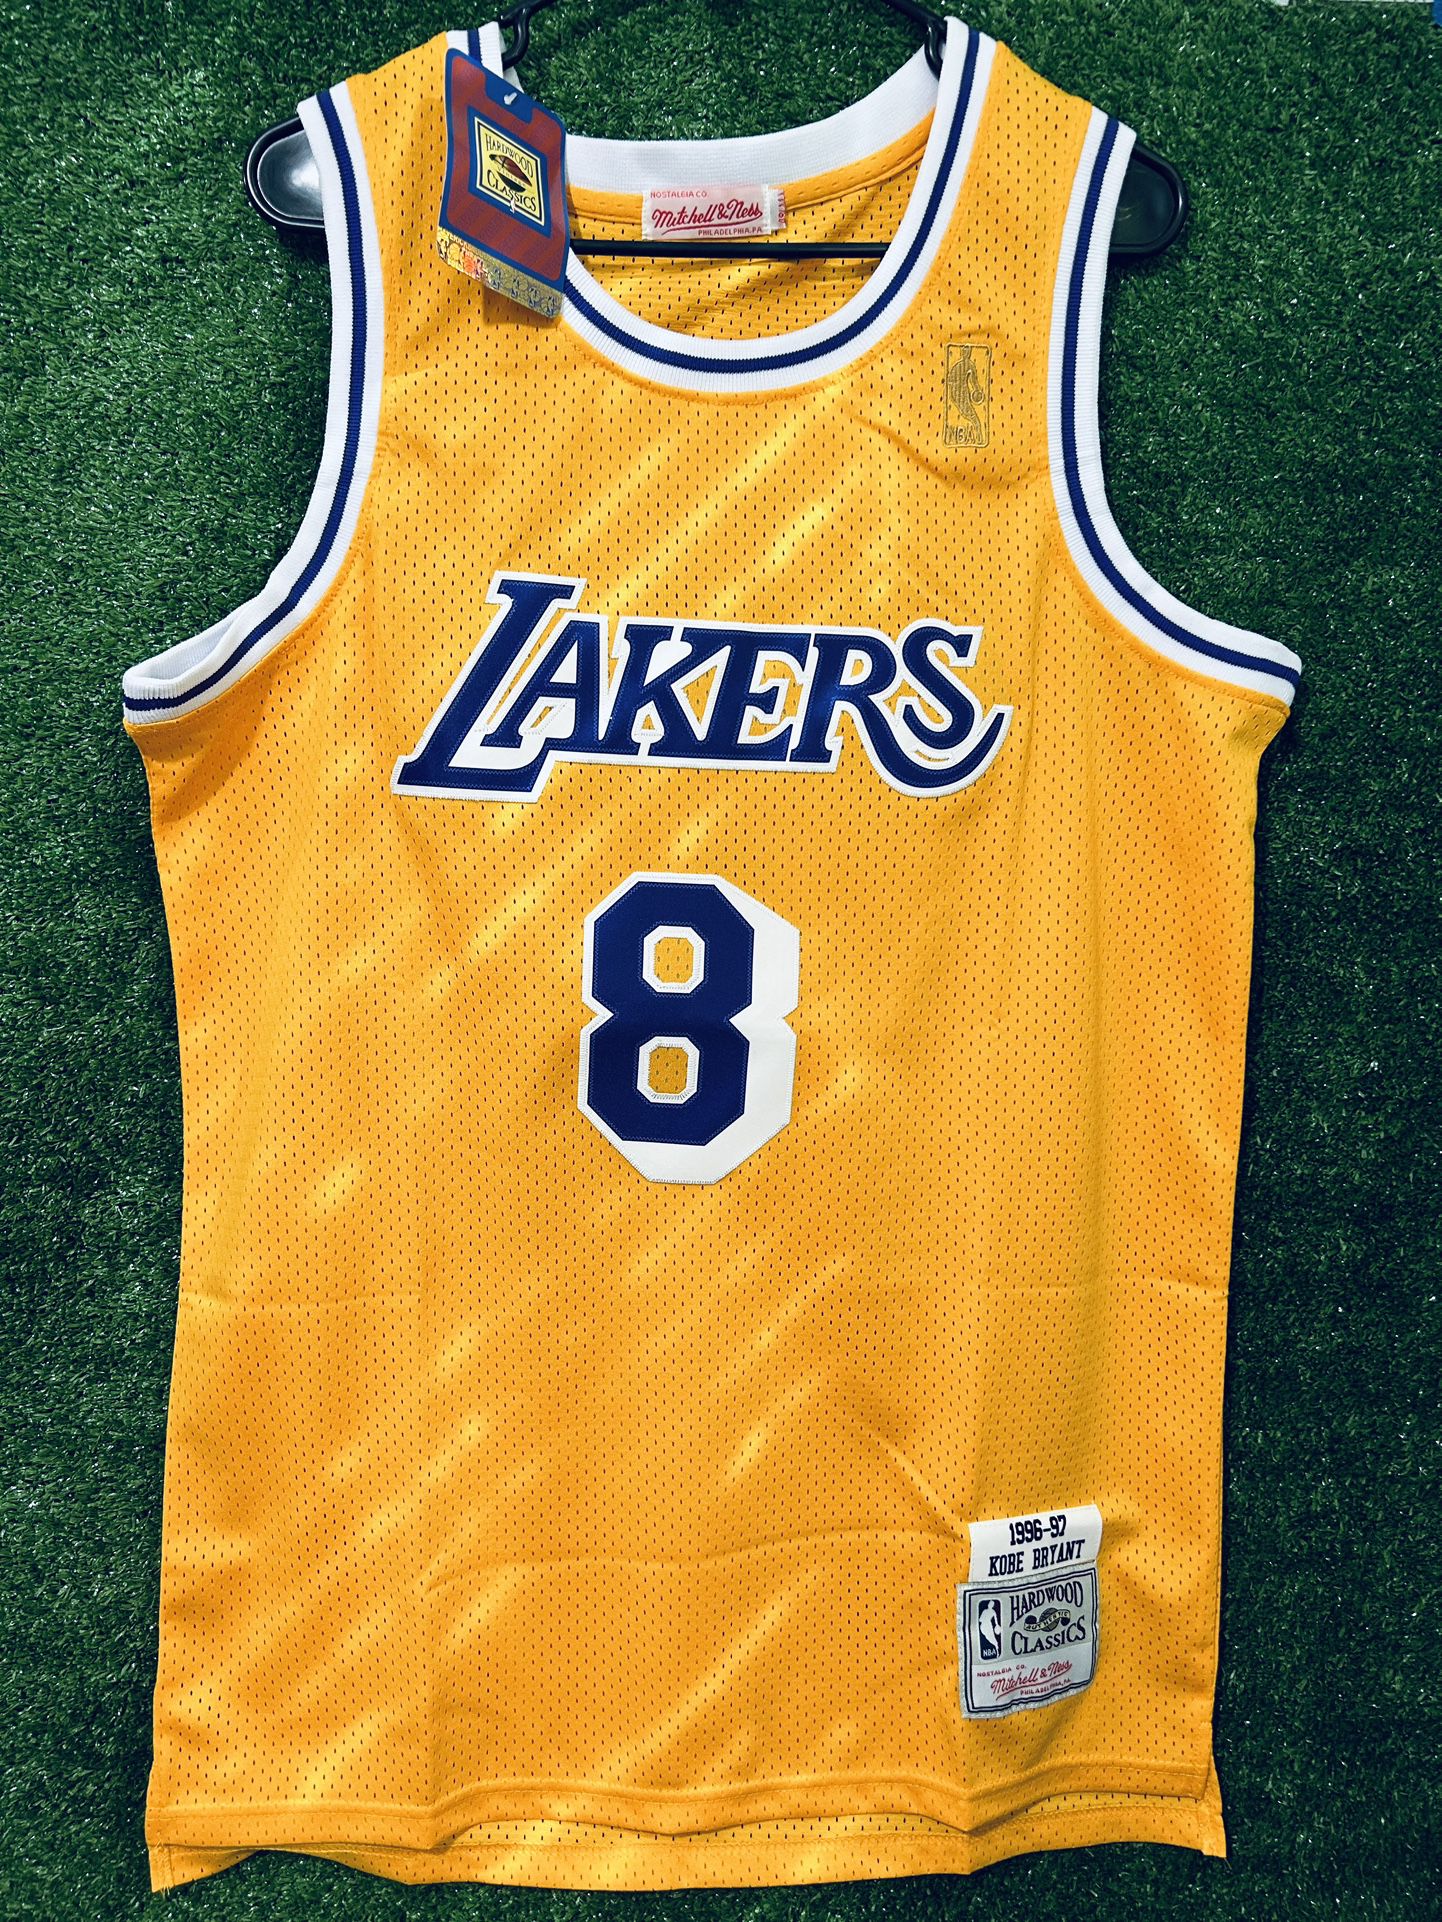 KOBE BRYANT LOS ANGELES LAKERS MITCHELL & NESS JERSEY BRAND NEW WITH TAGS SIZE MEDIUM, LARGE AND XL AVAILABLE 